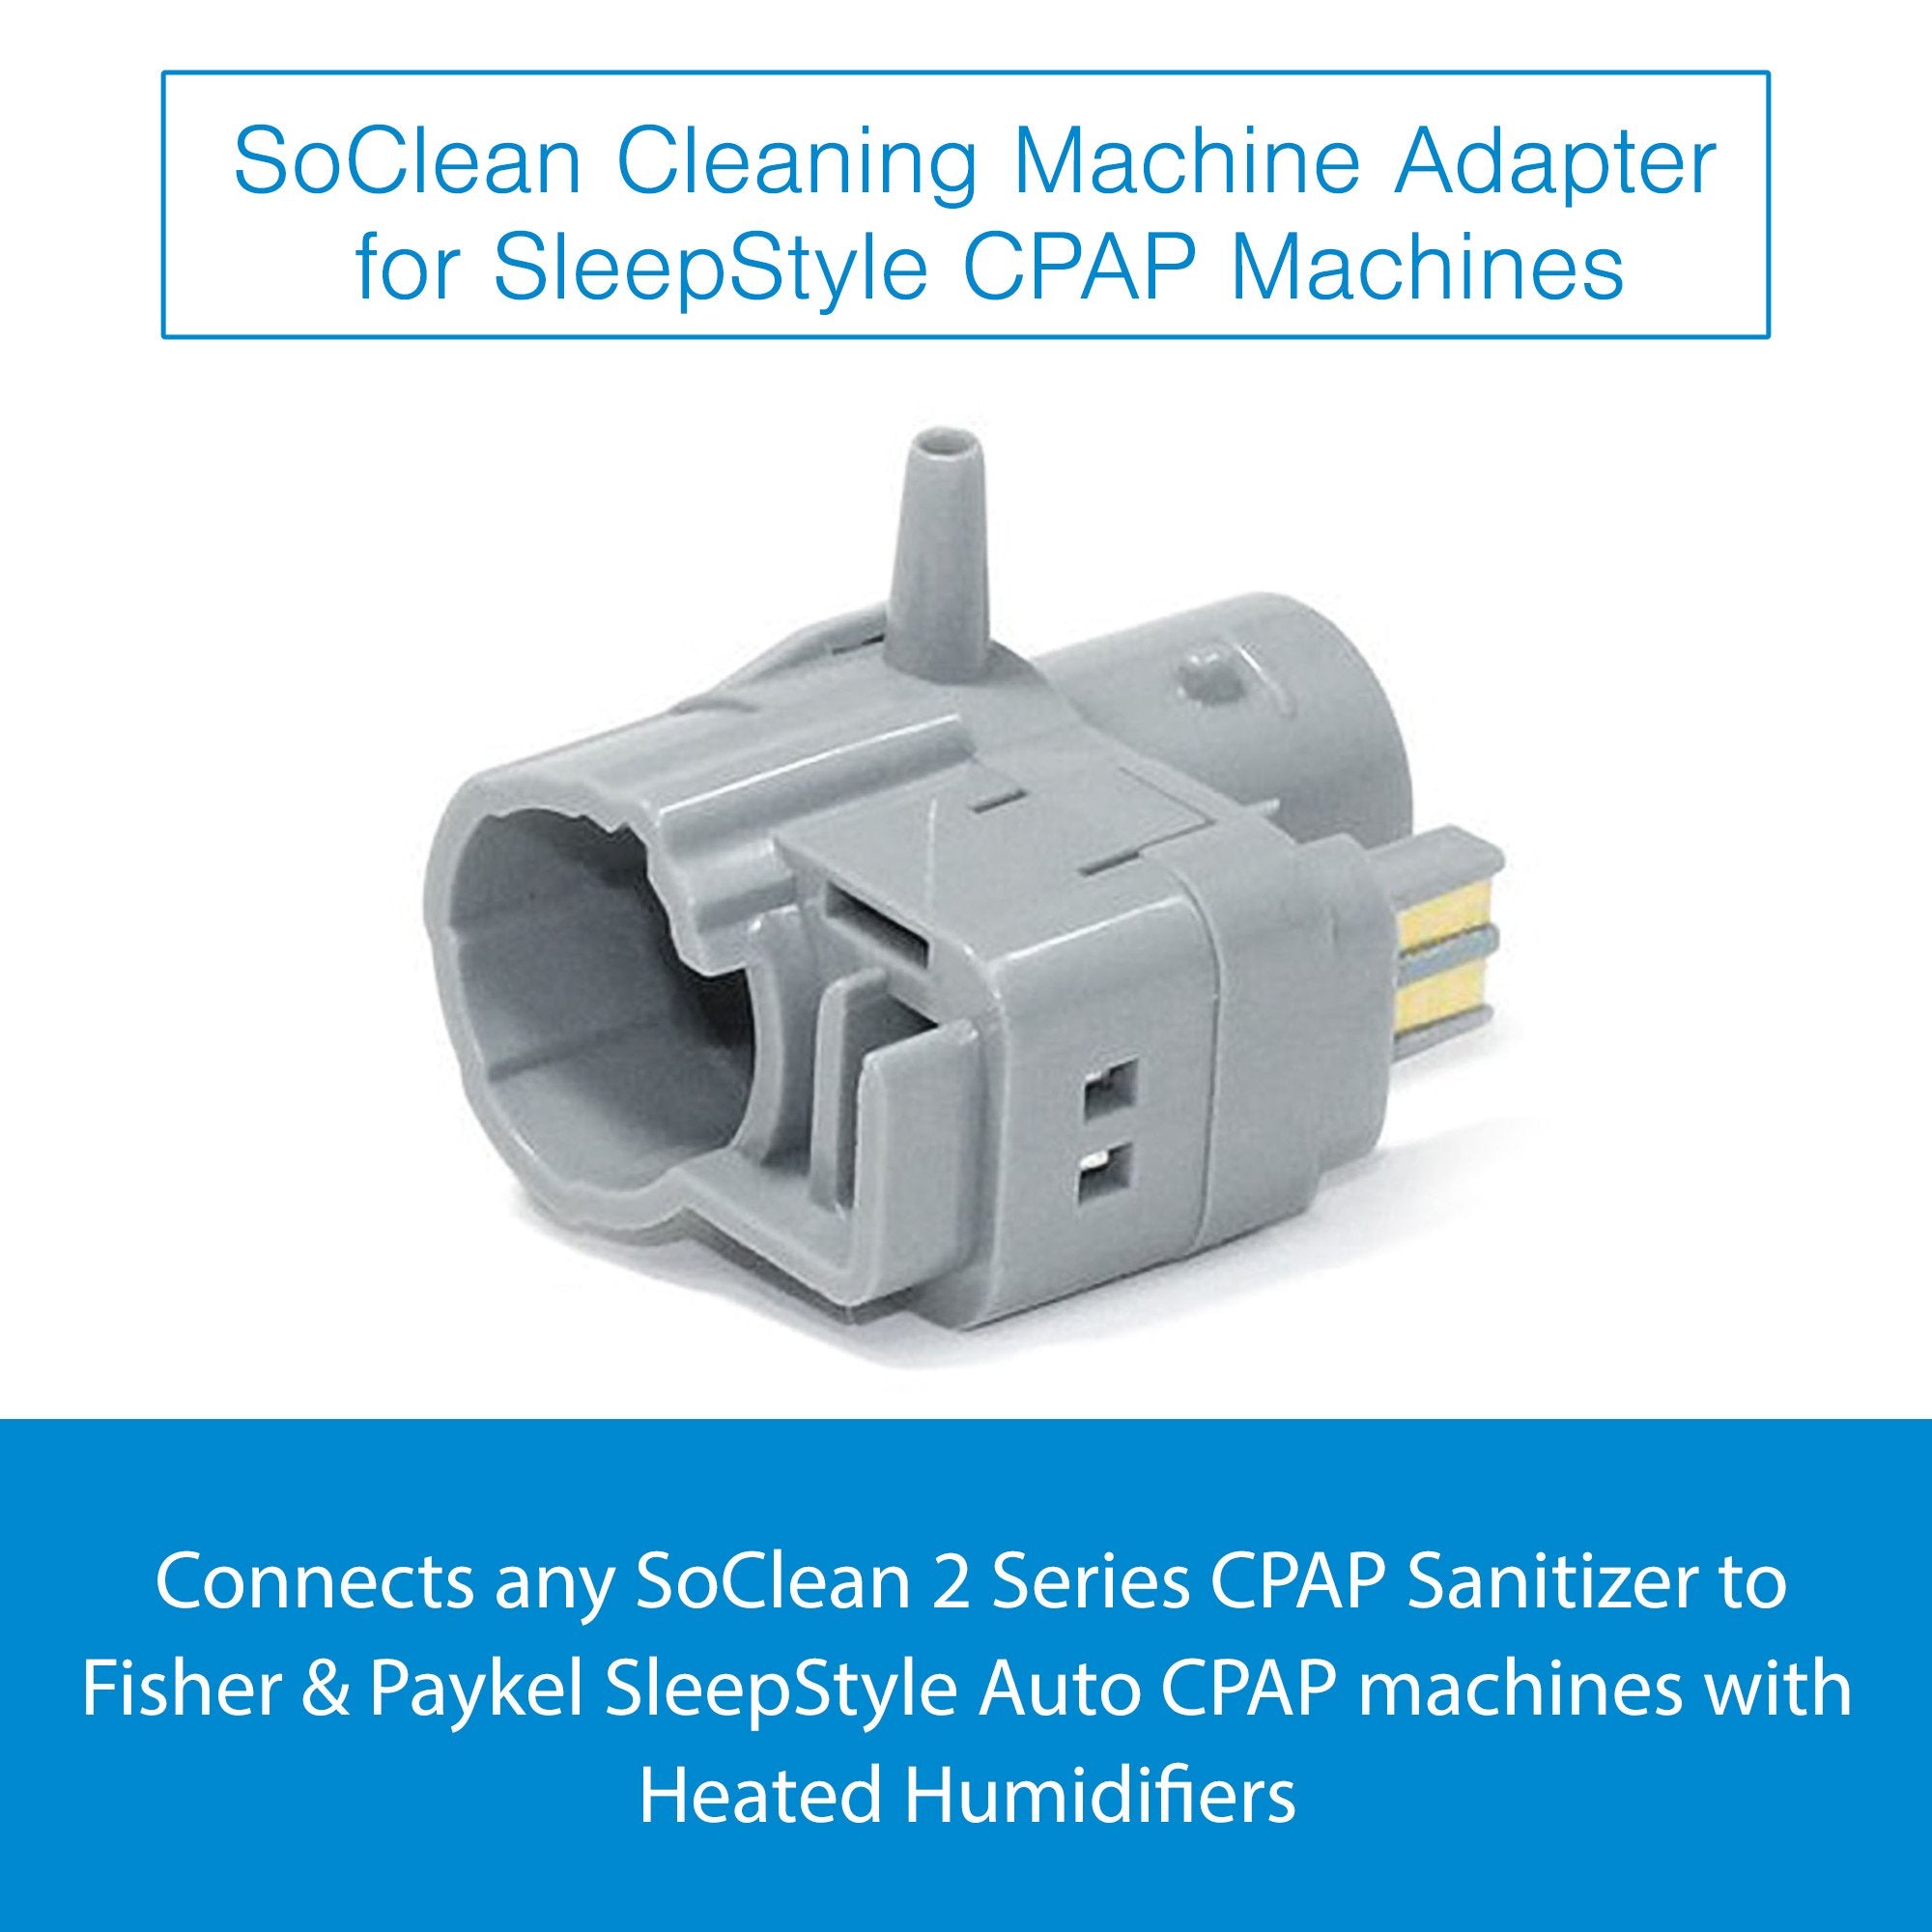 CPAP Cleaning Machine Adapter SoClean For Fisher & Paykel SleepStyle CPAP Machines